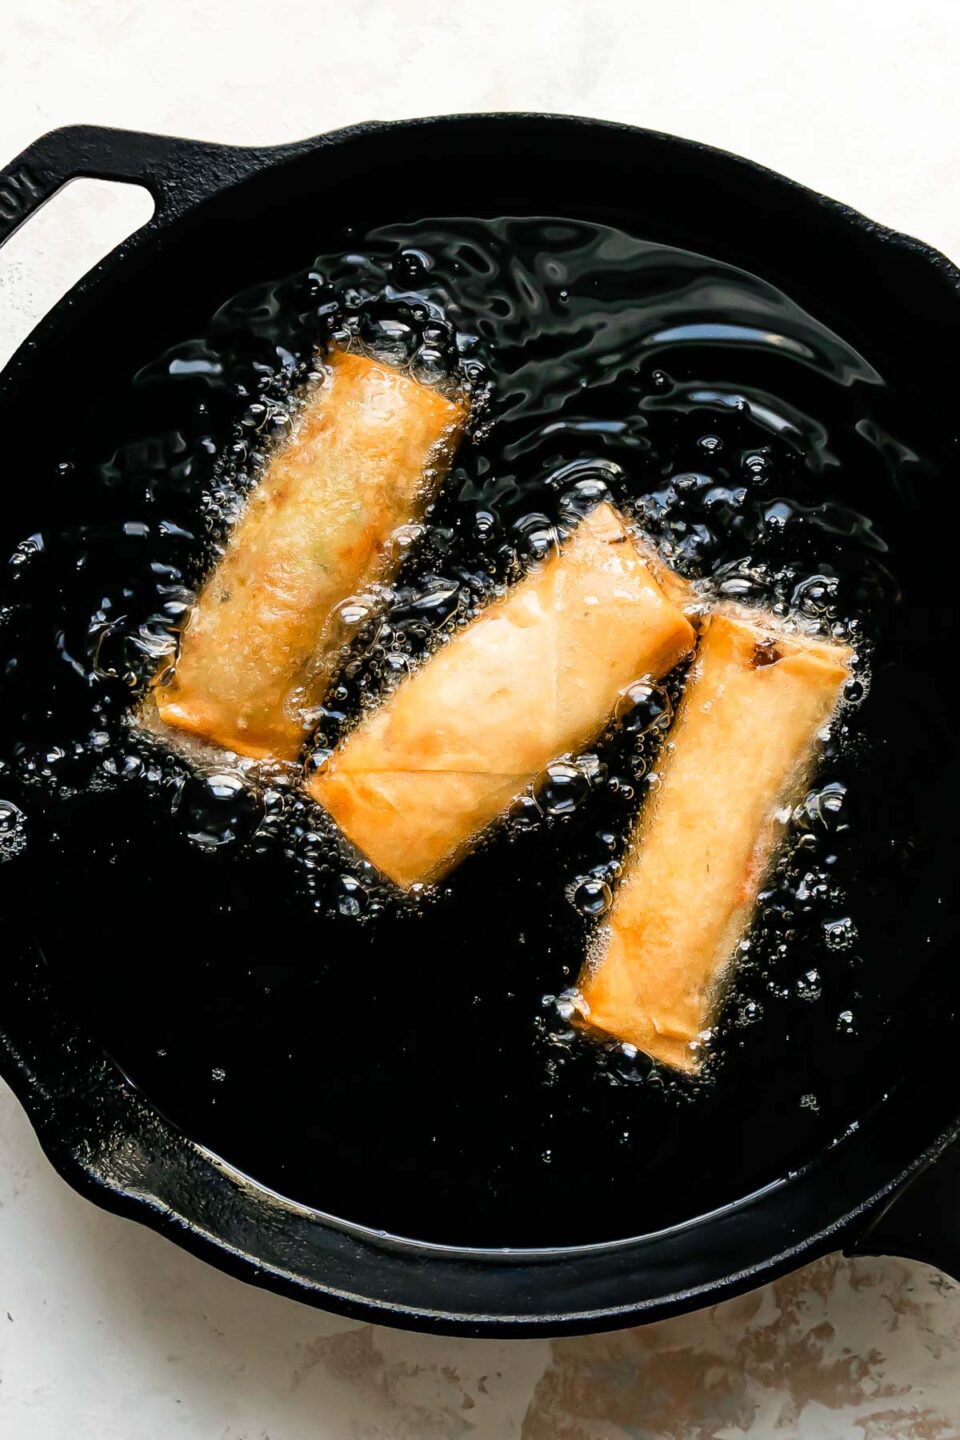 Three pork egg rolls shallow fry inside of a large black skillet that sits atop a creamy white textured surface.